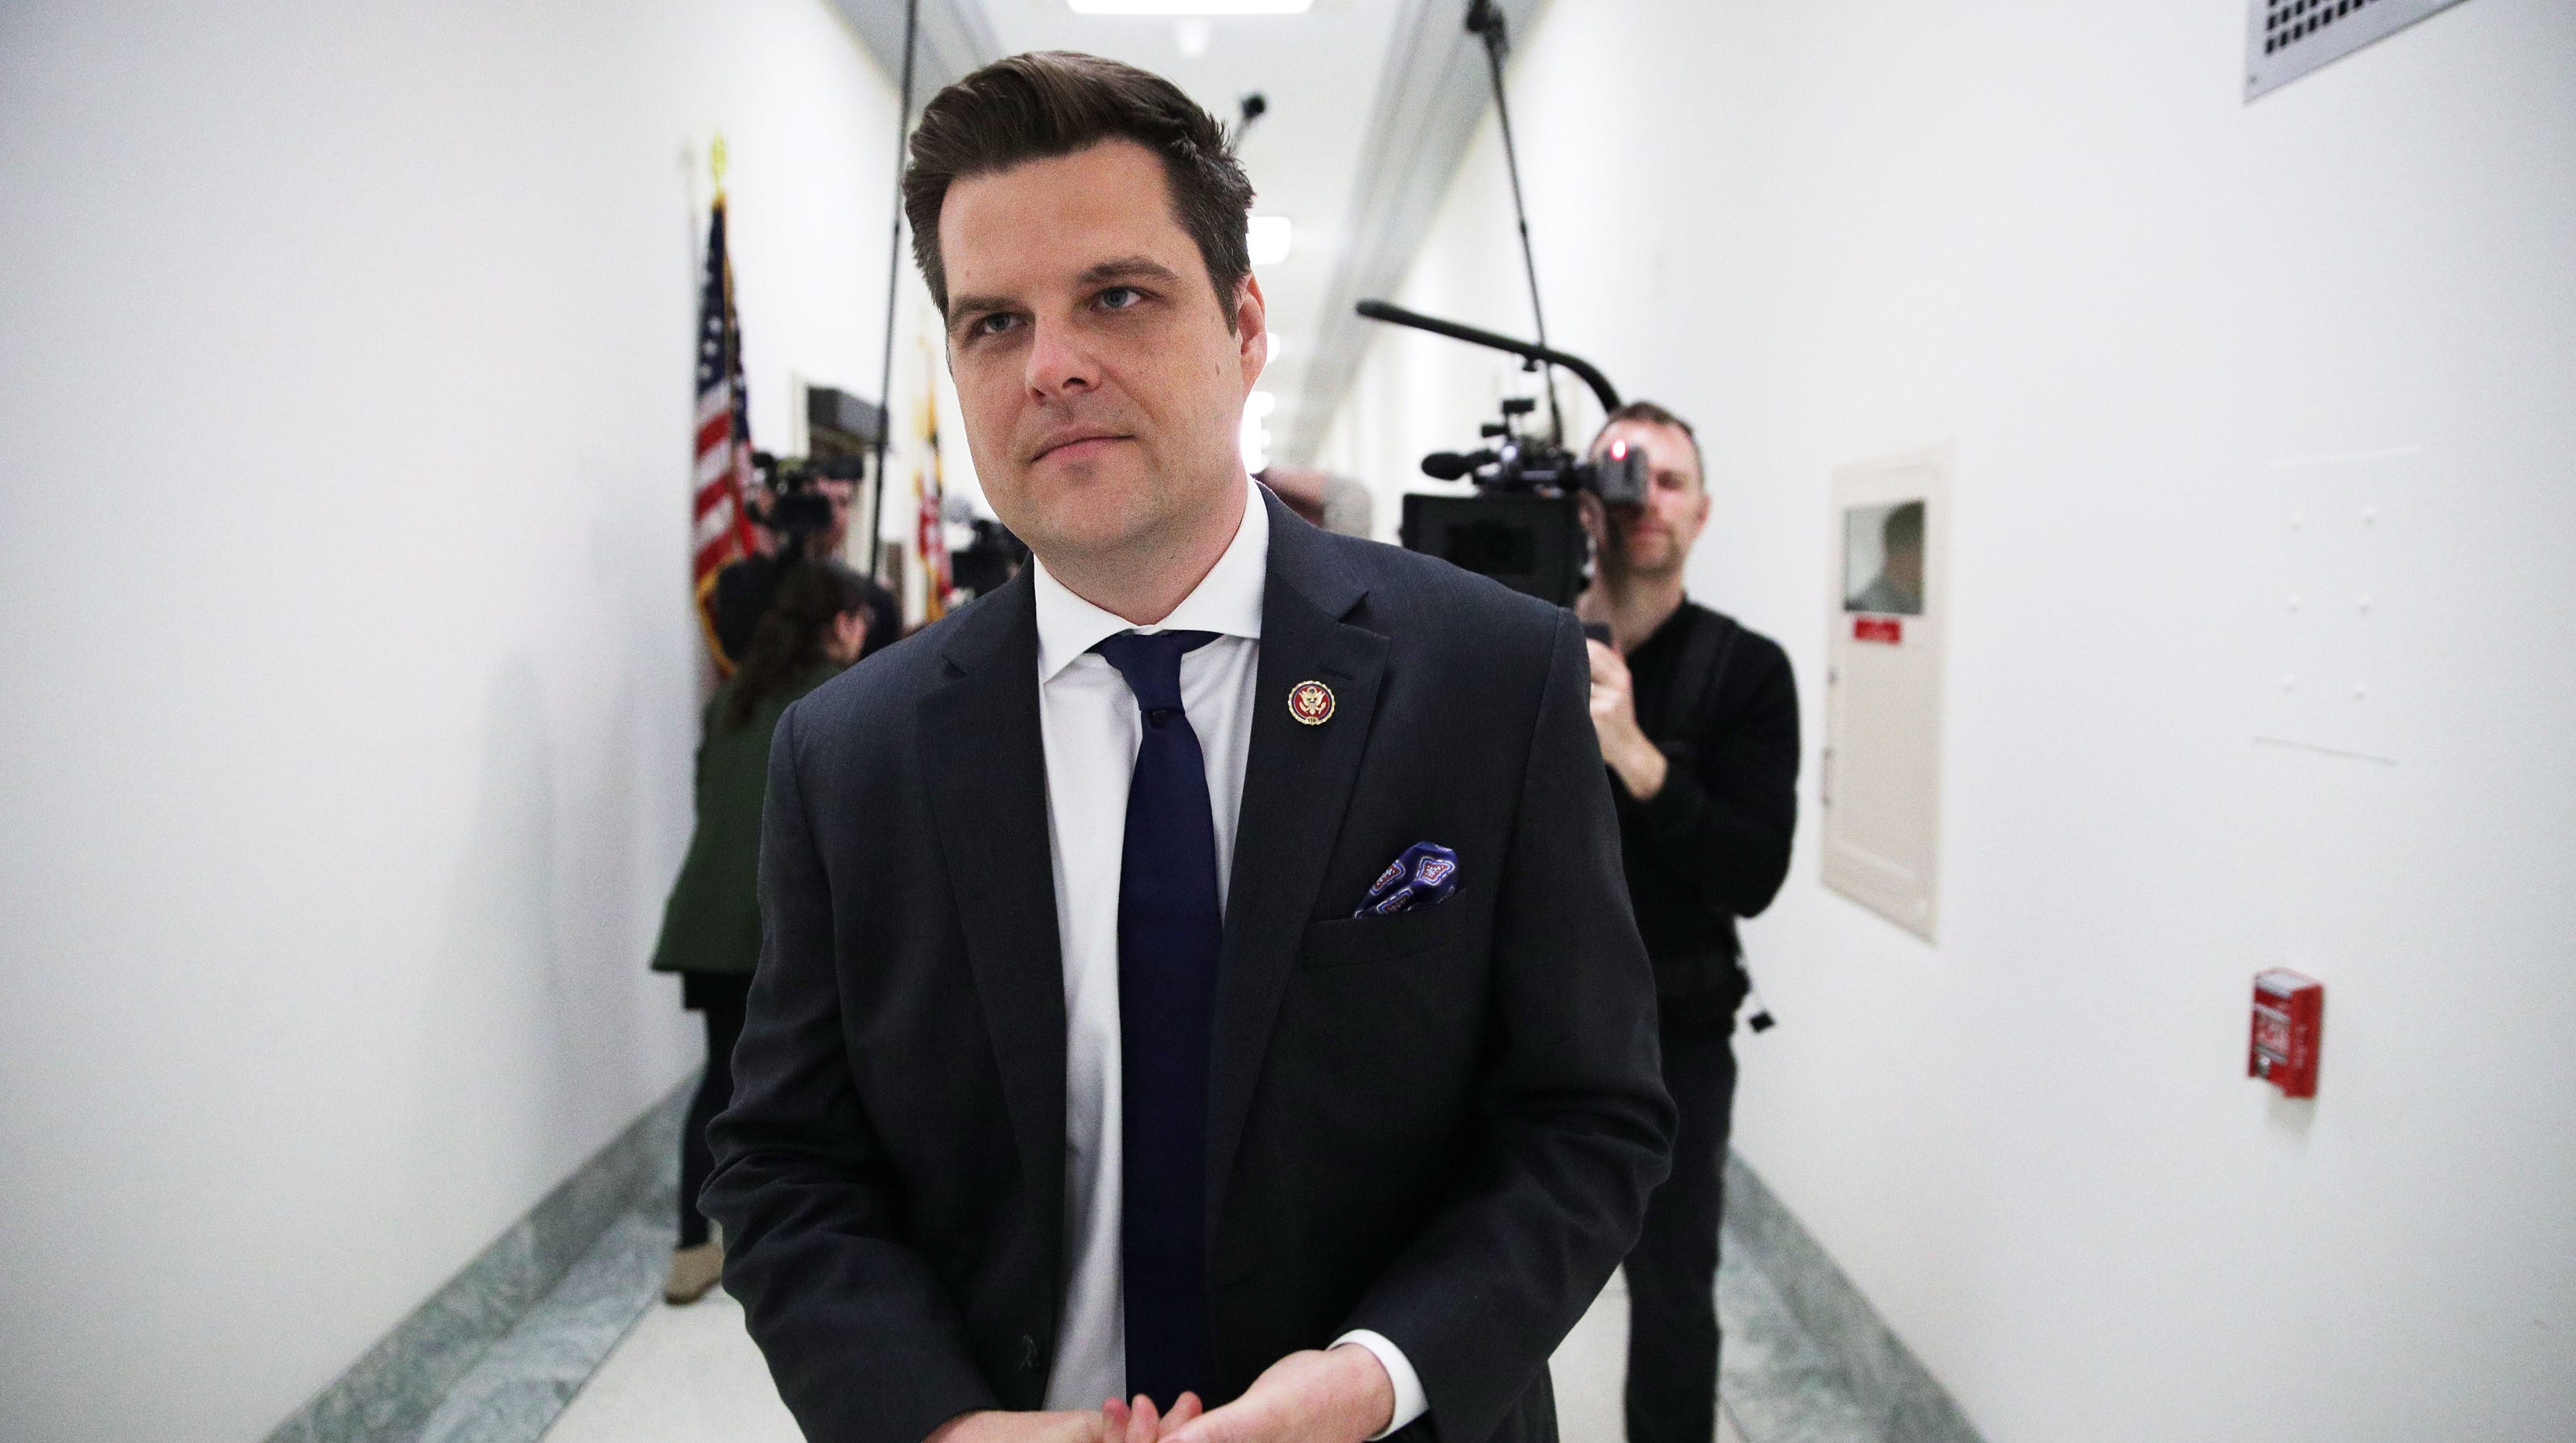 Porn Pics Deleted From Facebook From Pensacola - Rep. Matt Gaetz faces ethics probe of tweets on Michael Cohen